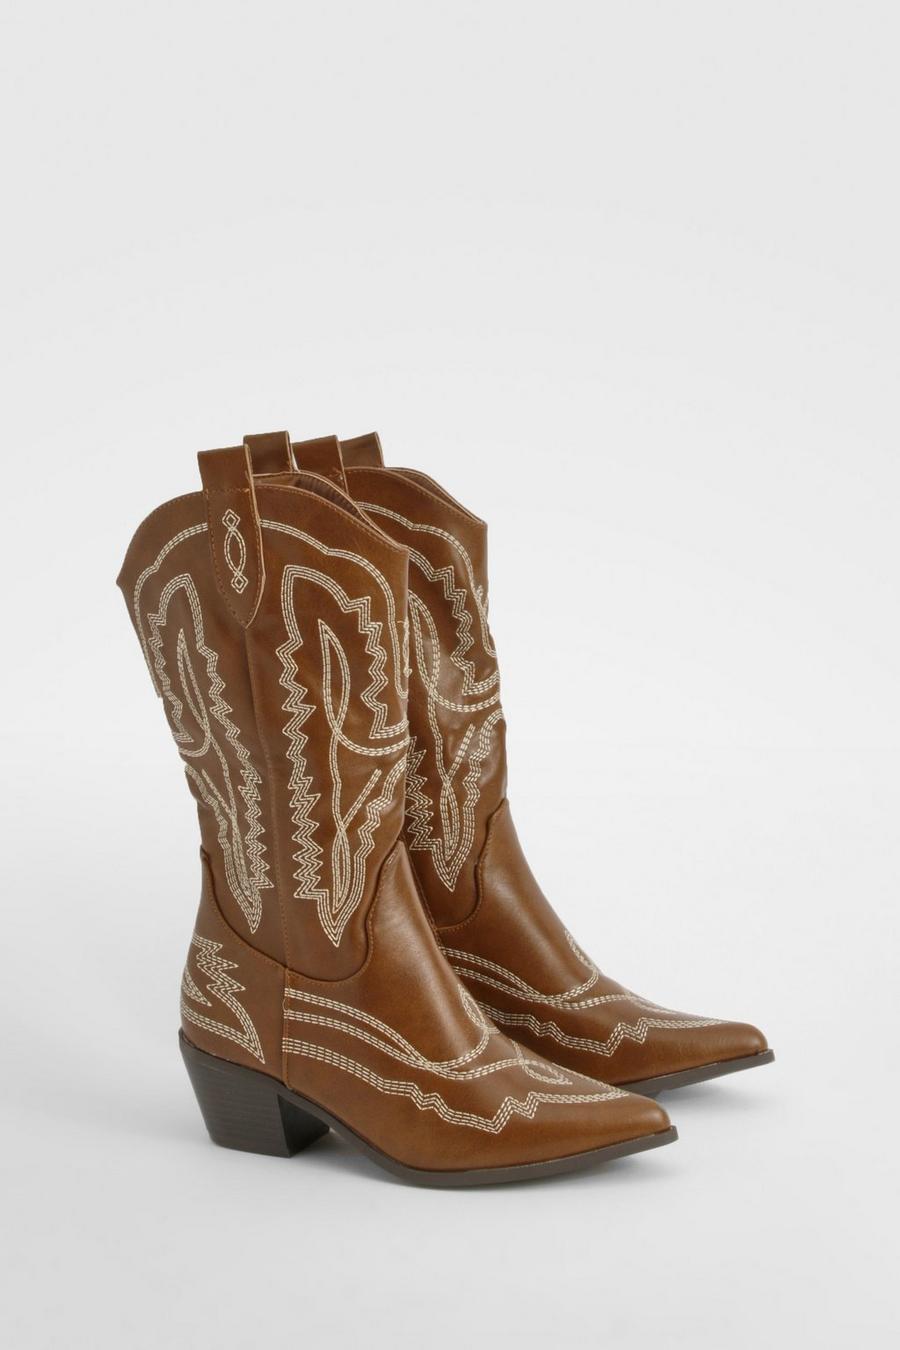 Camel Contrast Stitching Western Cowboy Boots   